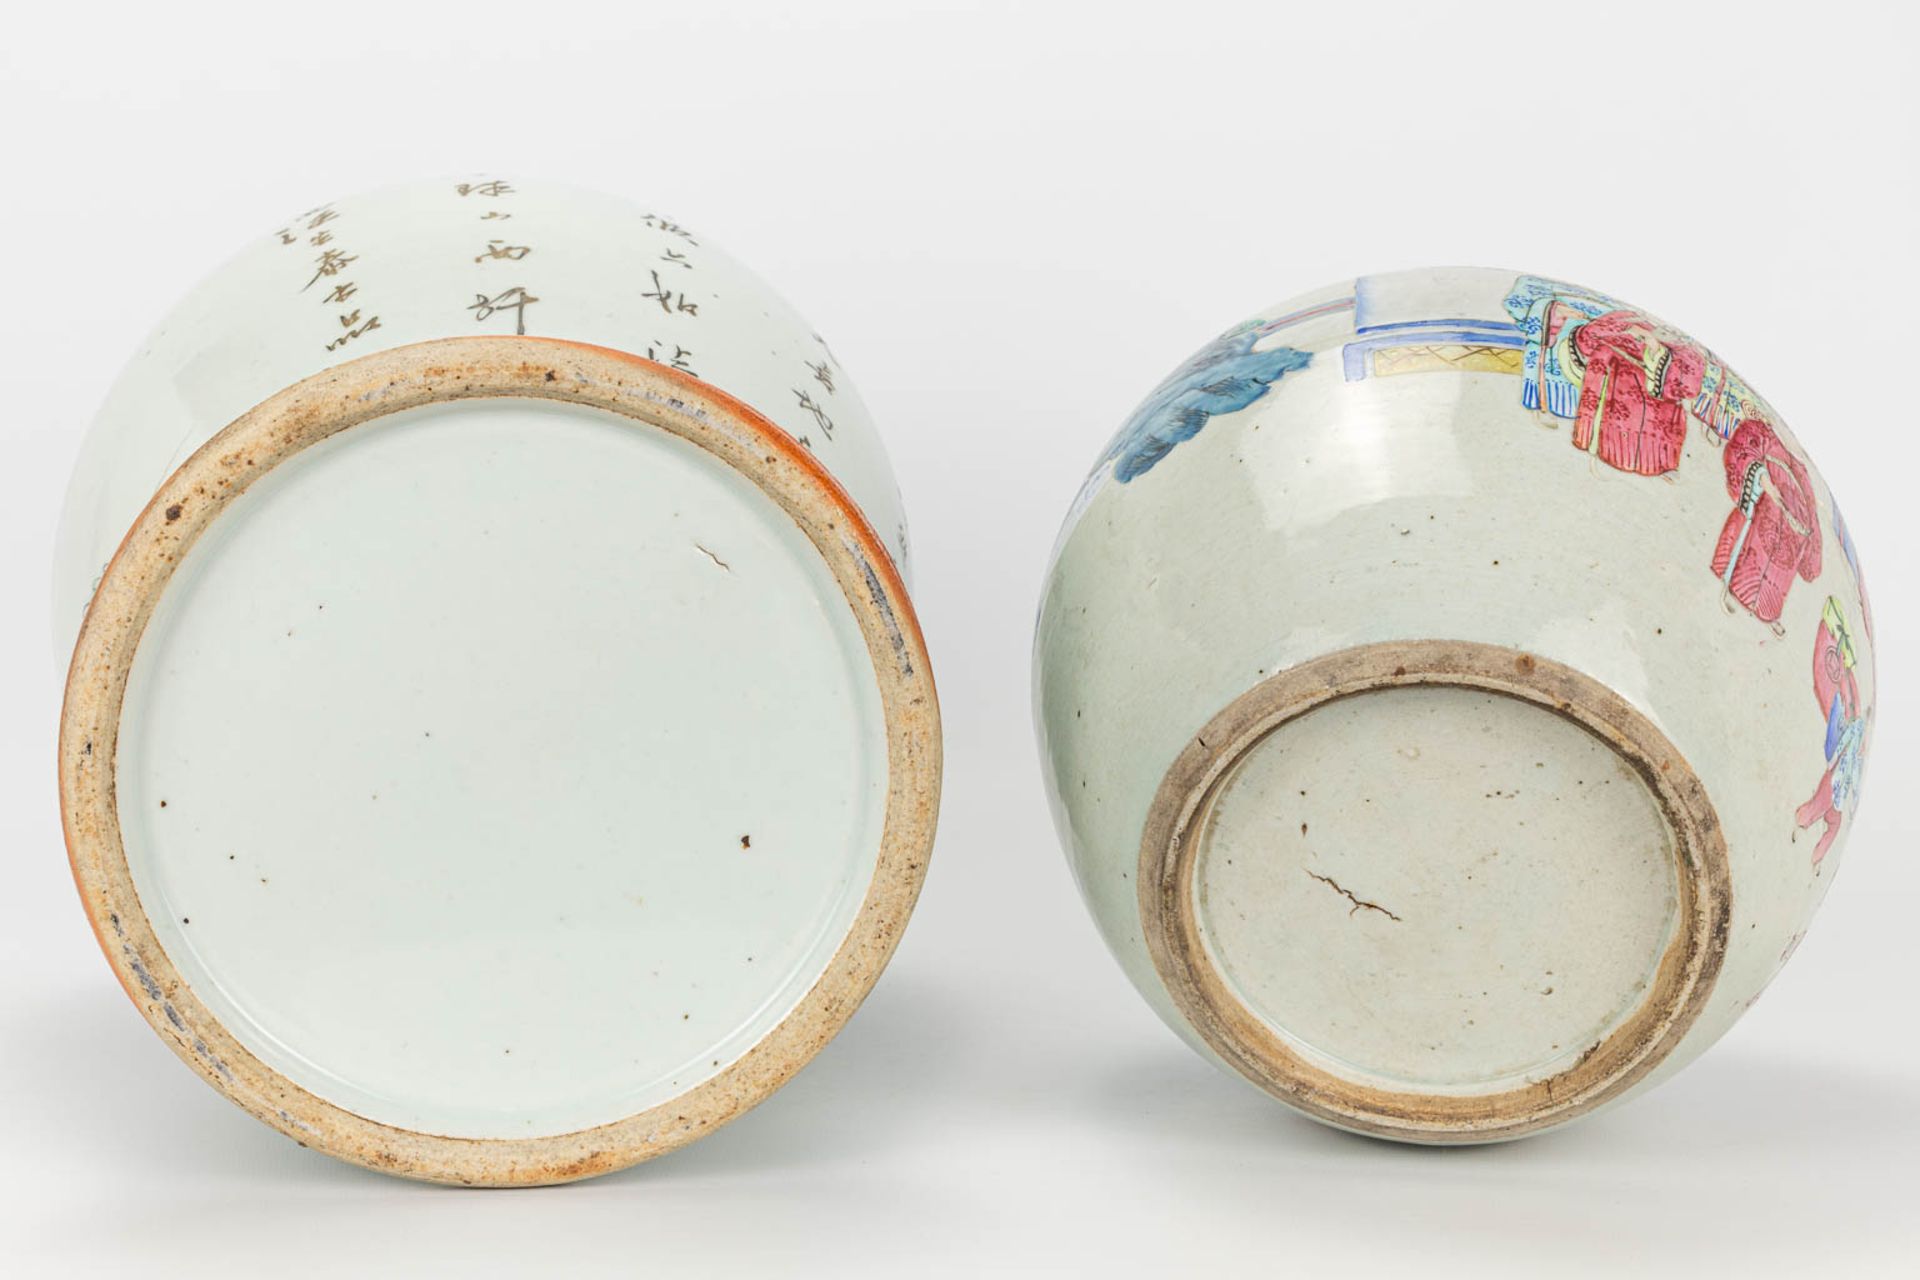 A set of 4 items made of Chinese porcelain. 2 small bowls and 2 ginger jars without lids. - Image 8 of 23